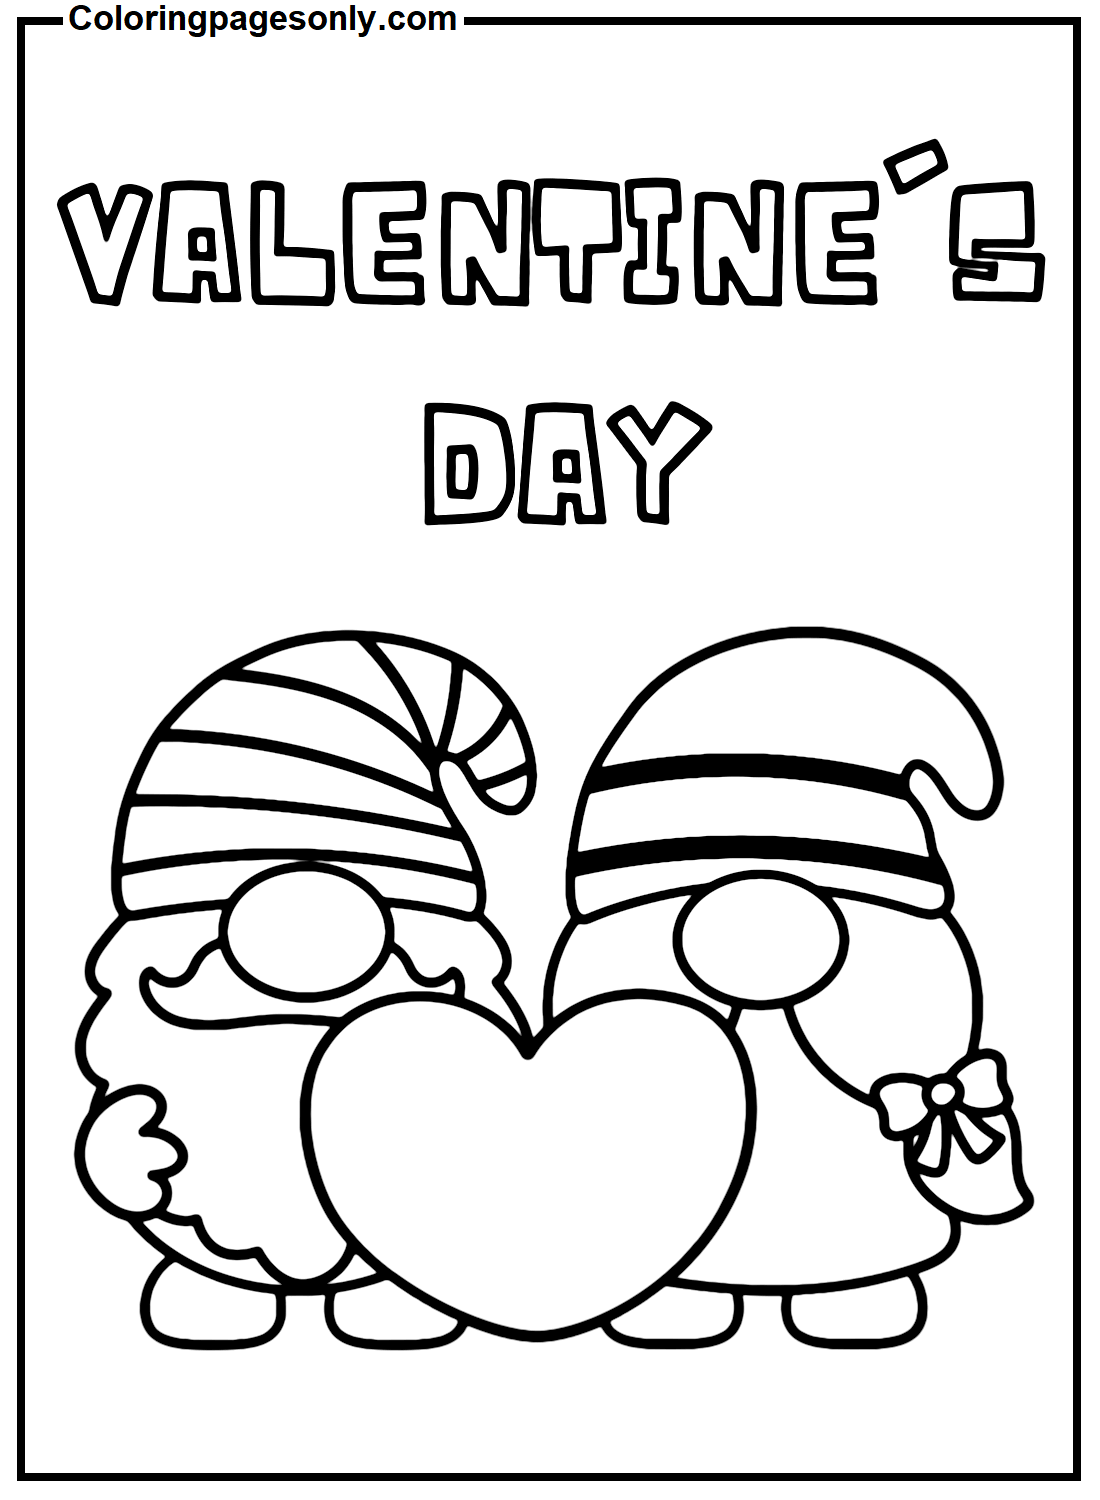 Gnomes In Valentine's Day Coloring Pages